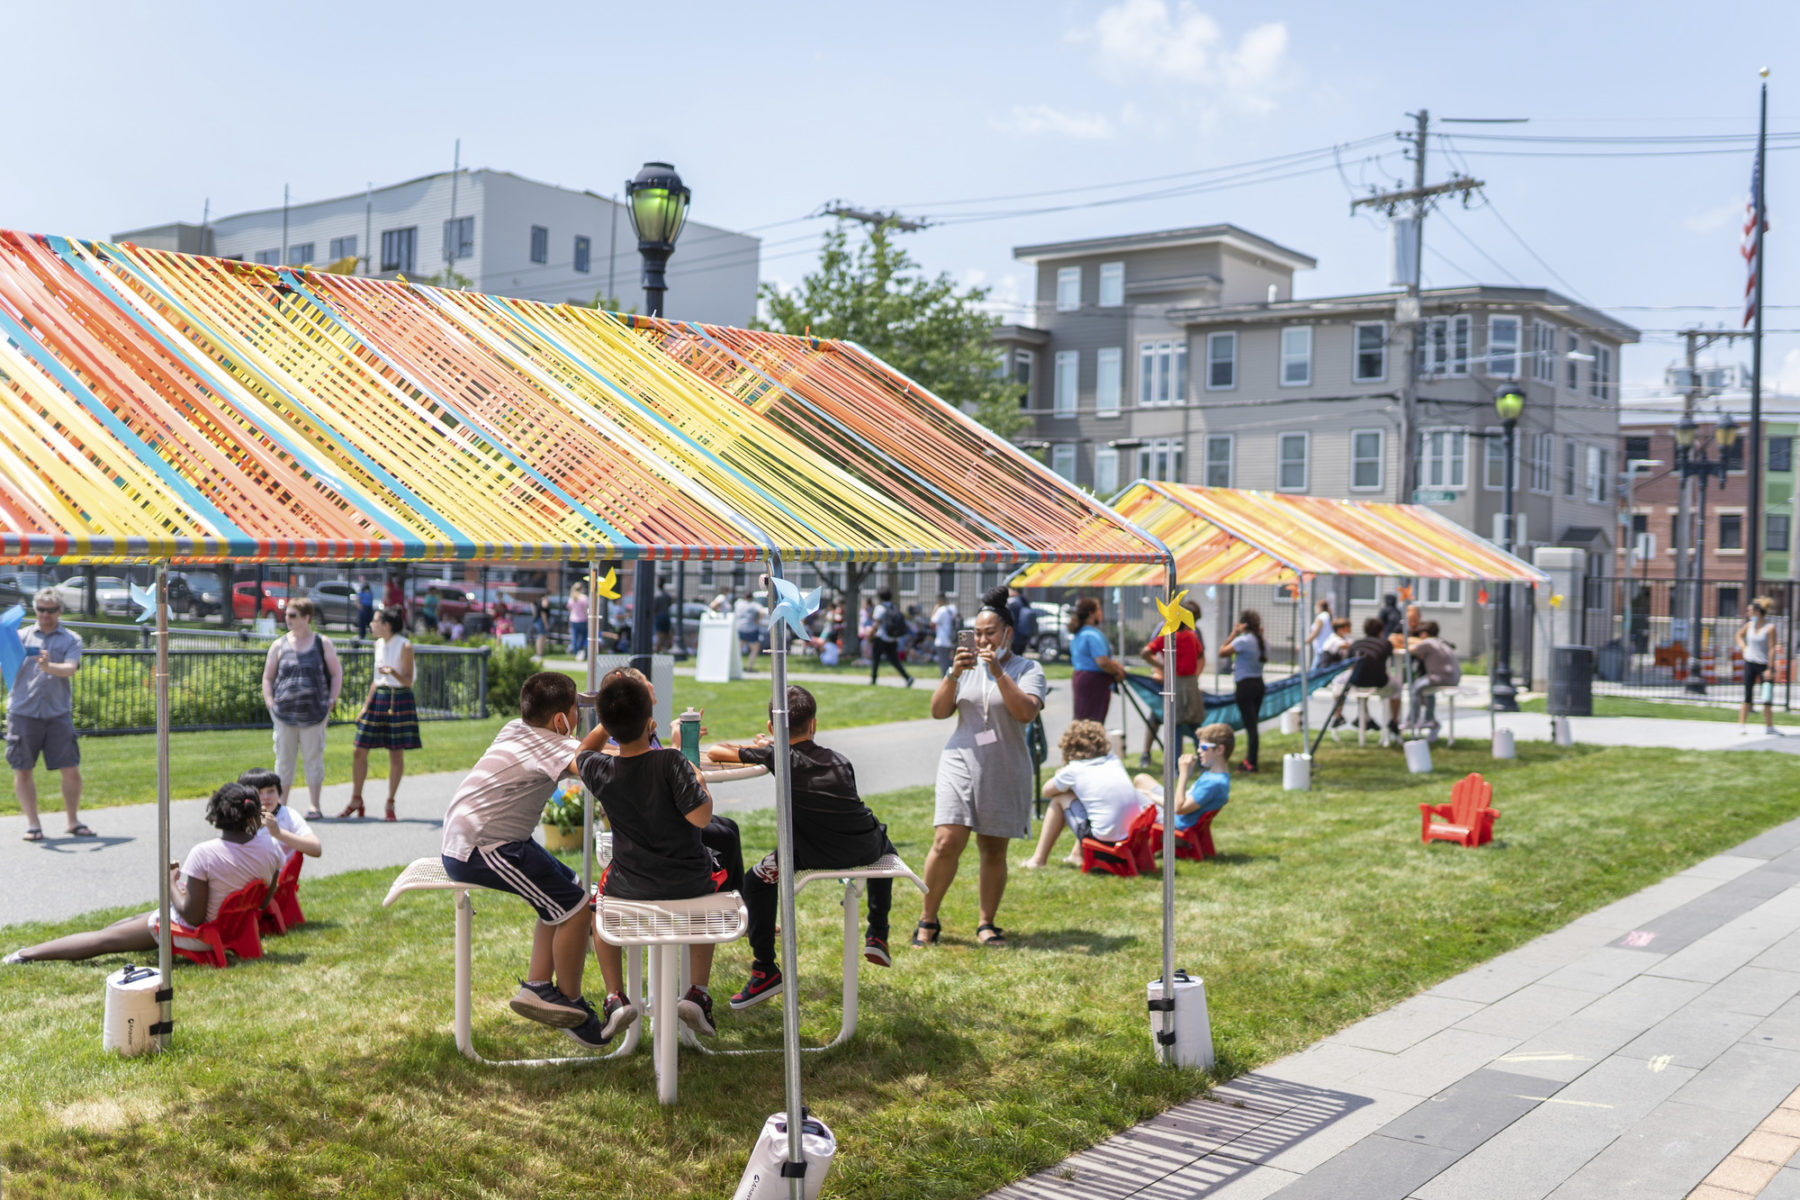 Someone takes a picture of a group of children under a colorful shade structure equipped with misters